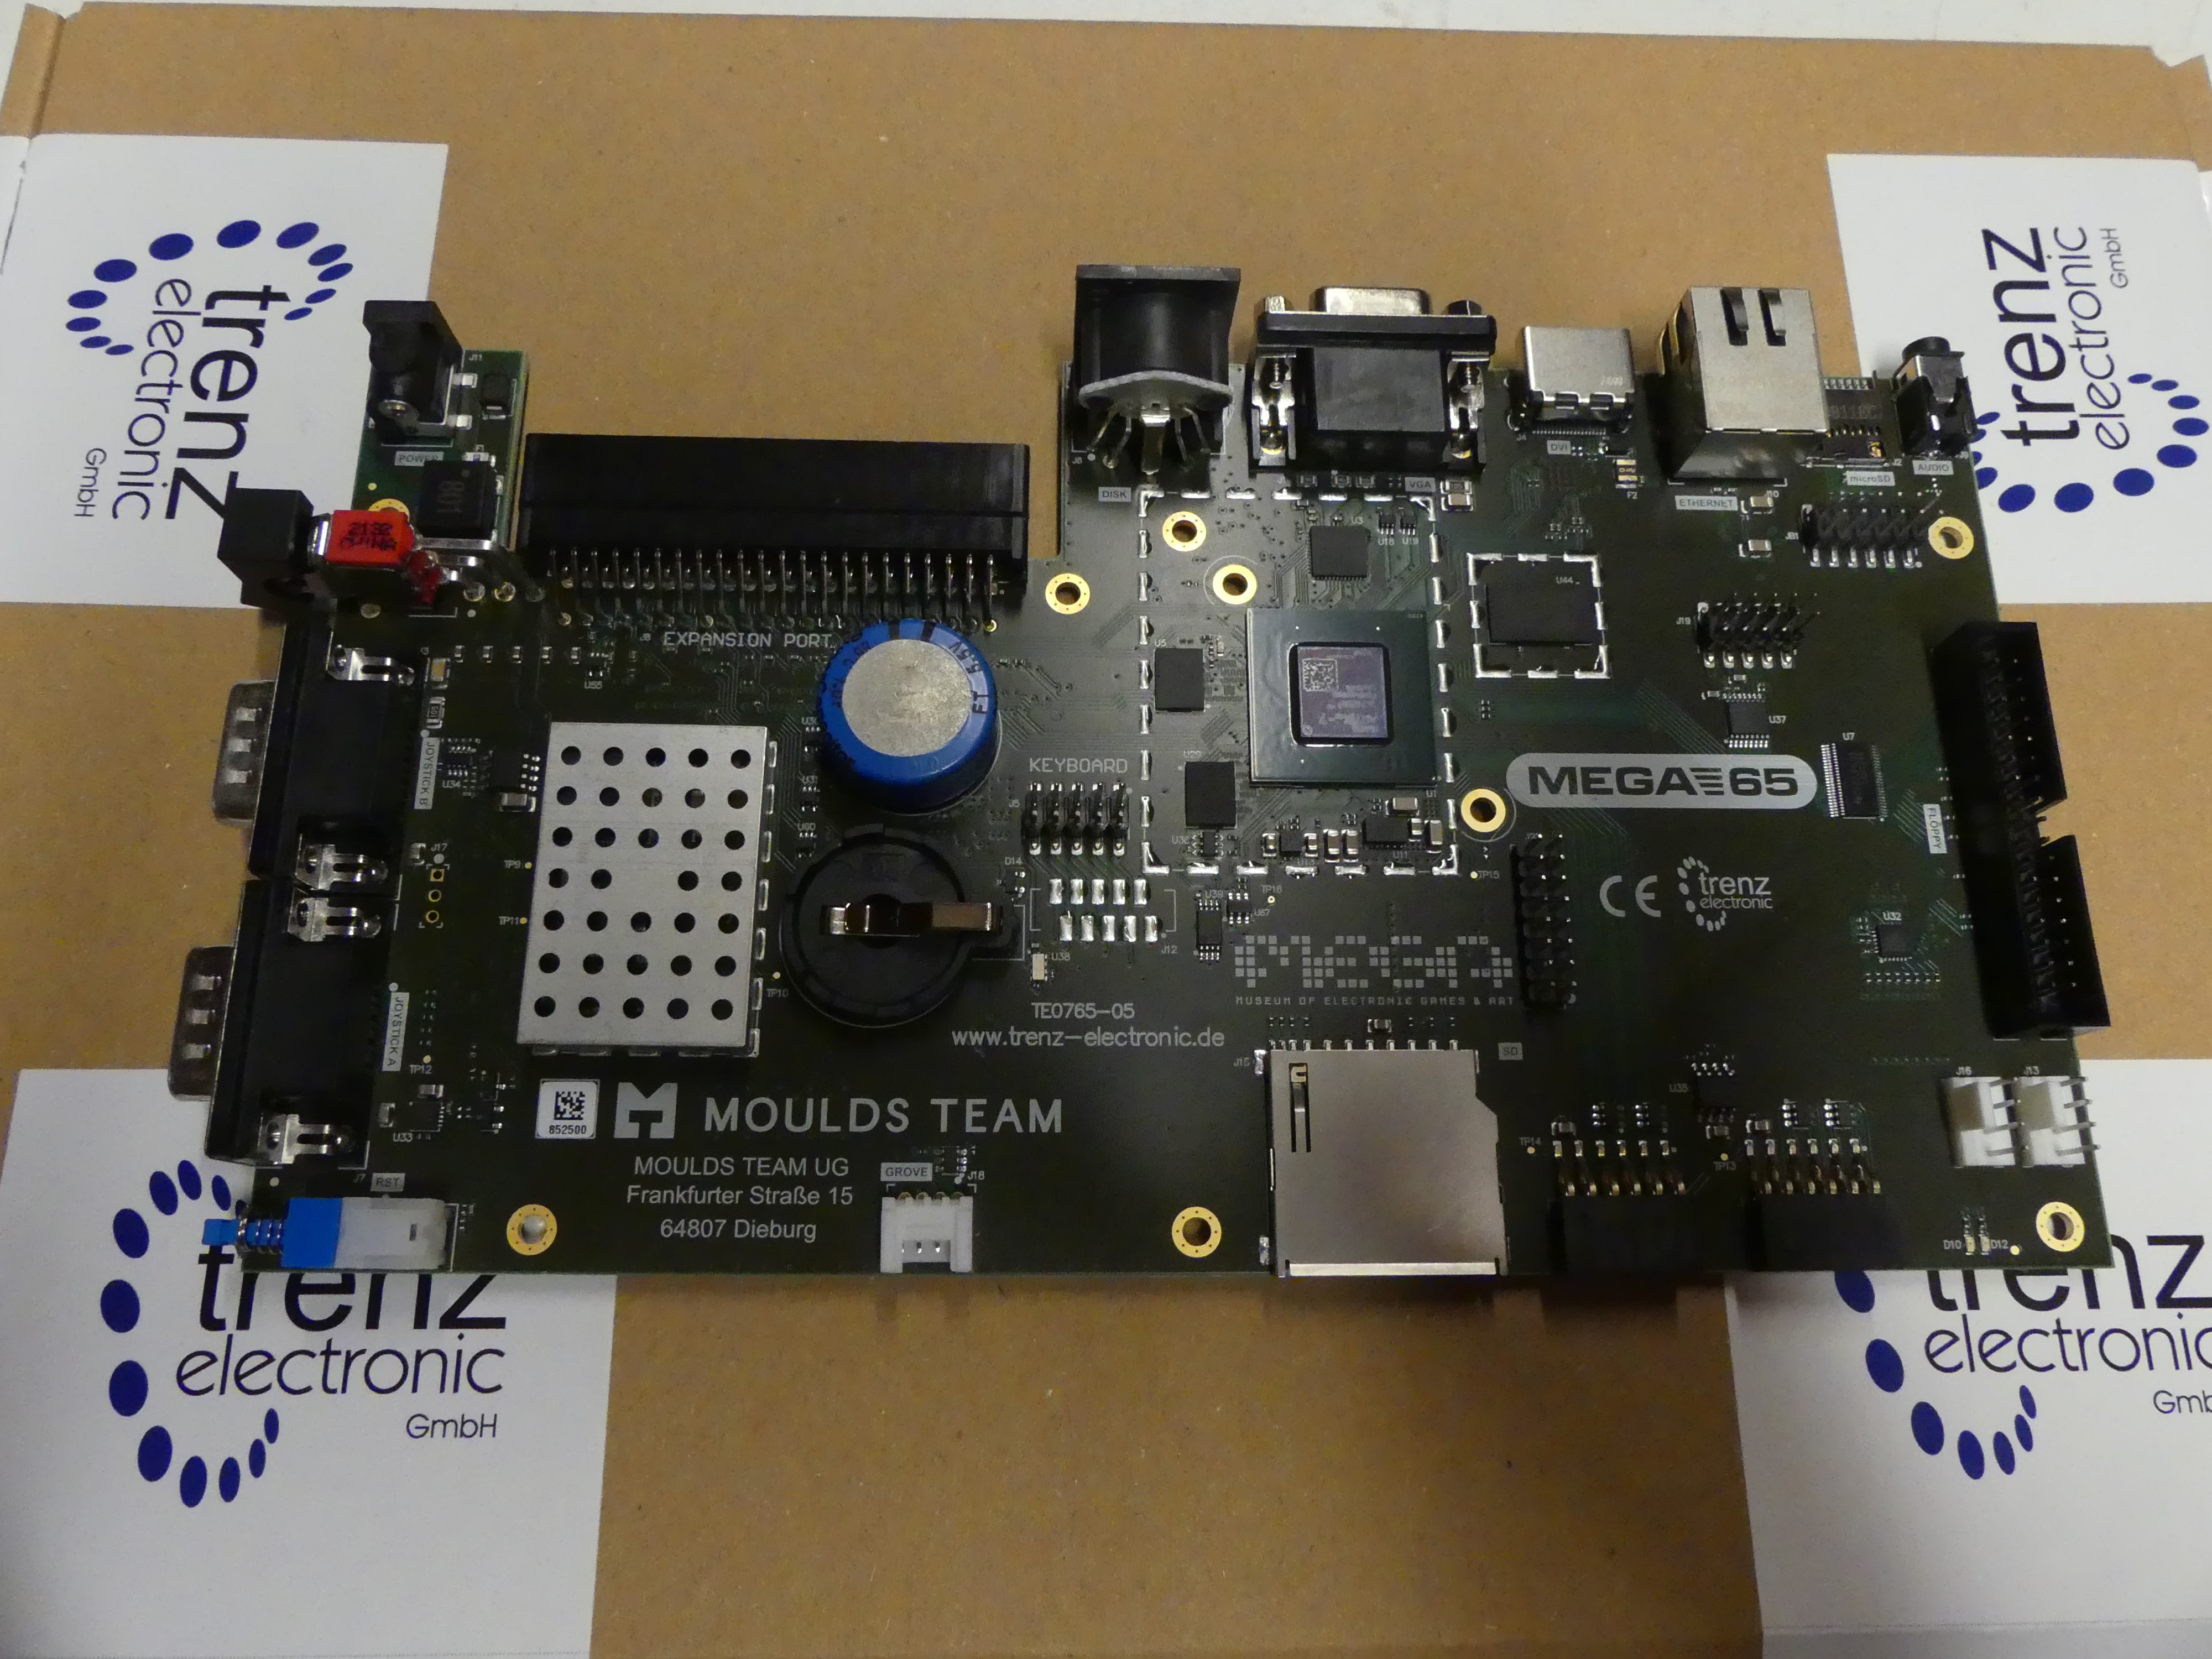 A test unit of the R5 main board.